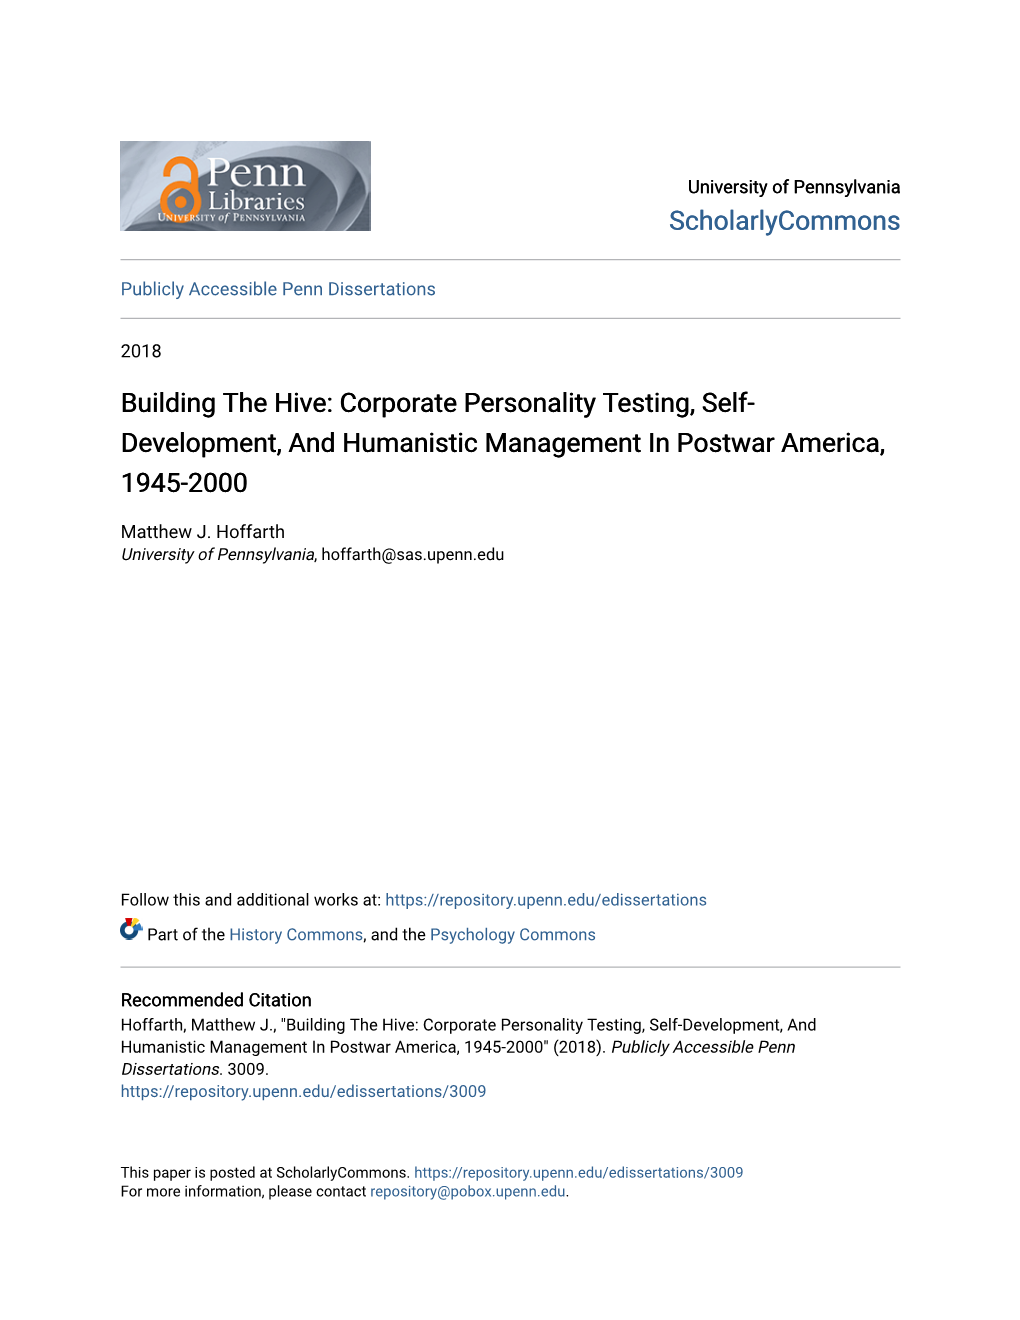 Corporate Personality Testing, Self- Development, and Humanistic Management in Postwar America, 1945-2000